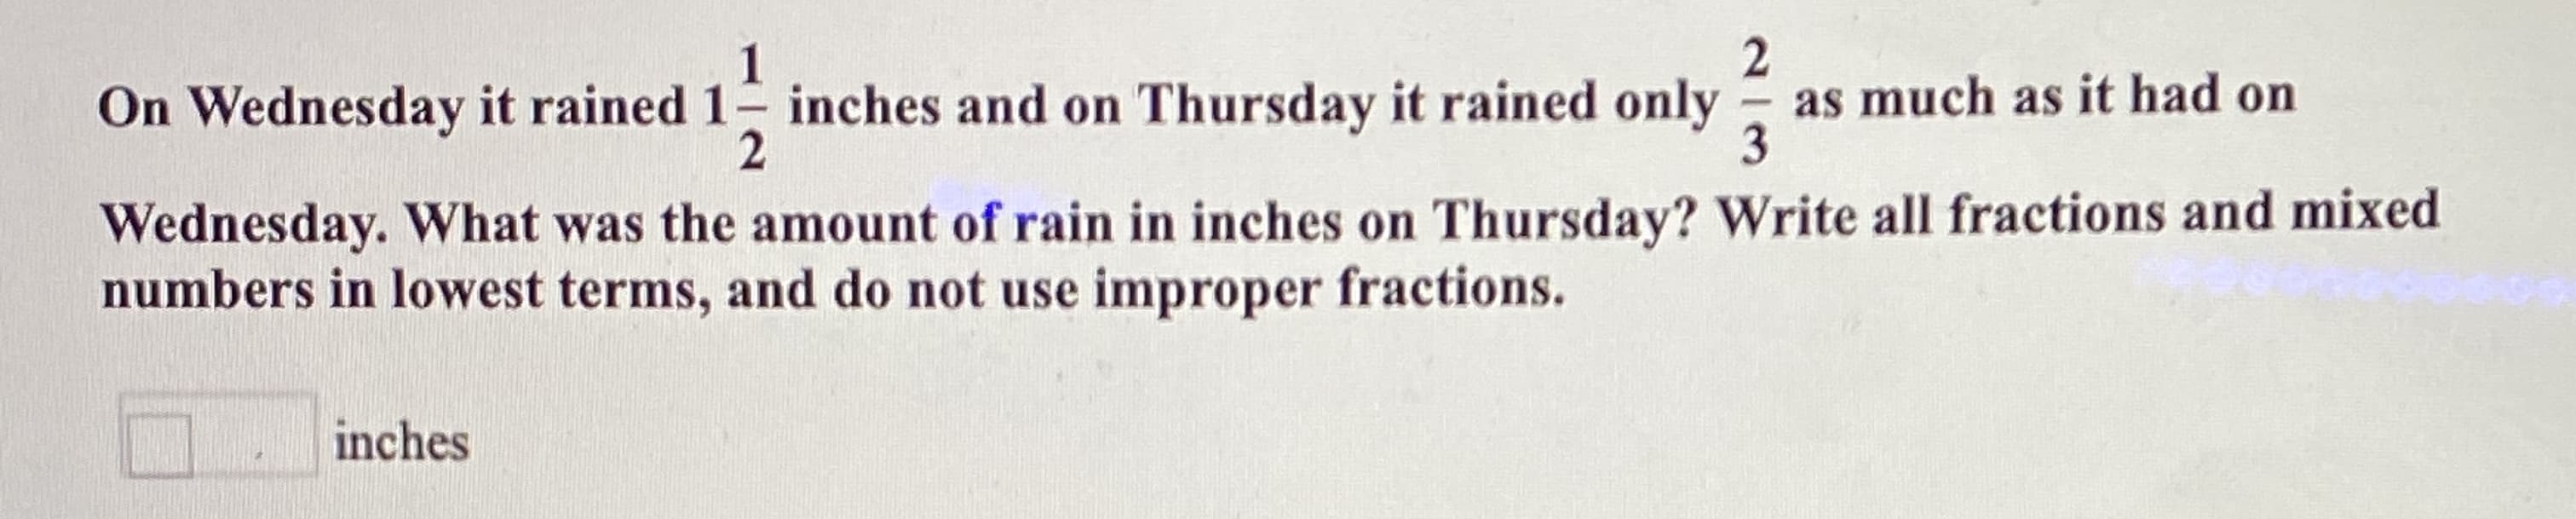 1
On Wednesday it rained 1 inches and on Thursday it rained only
as much as it had on
3
Wednesday. What was the amount of rain in inches on Thursday? Write all fractions and mixed
numbers in lowest terms, and do not use improper fractions.
